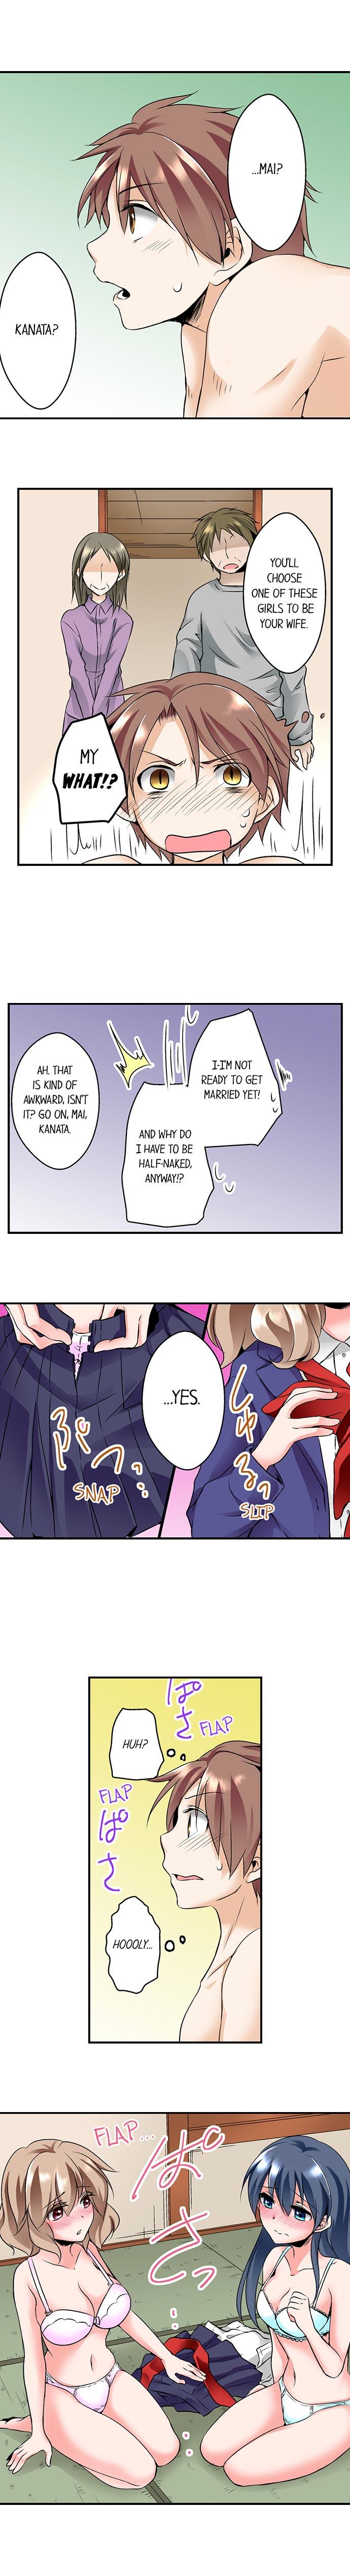 Puba Naked Matchmaking with My Childhood Friends Ch.11/? Calle - Page 7